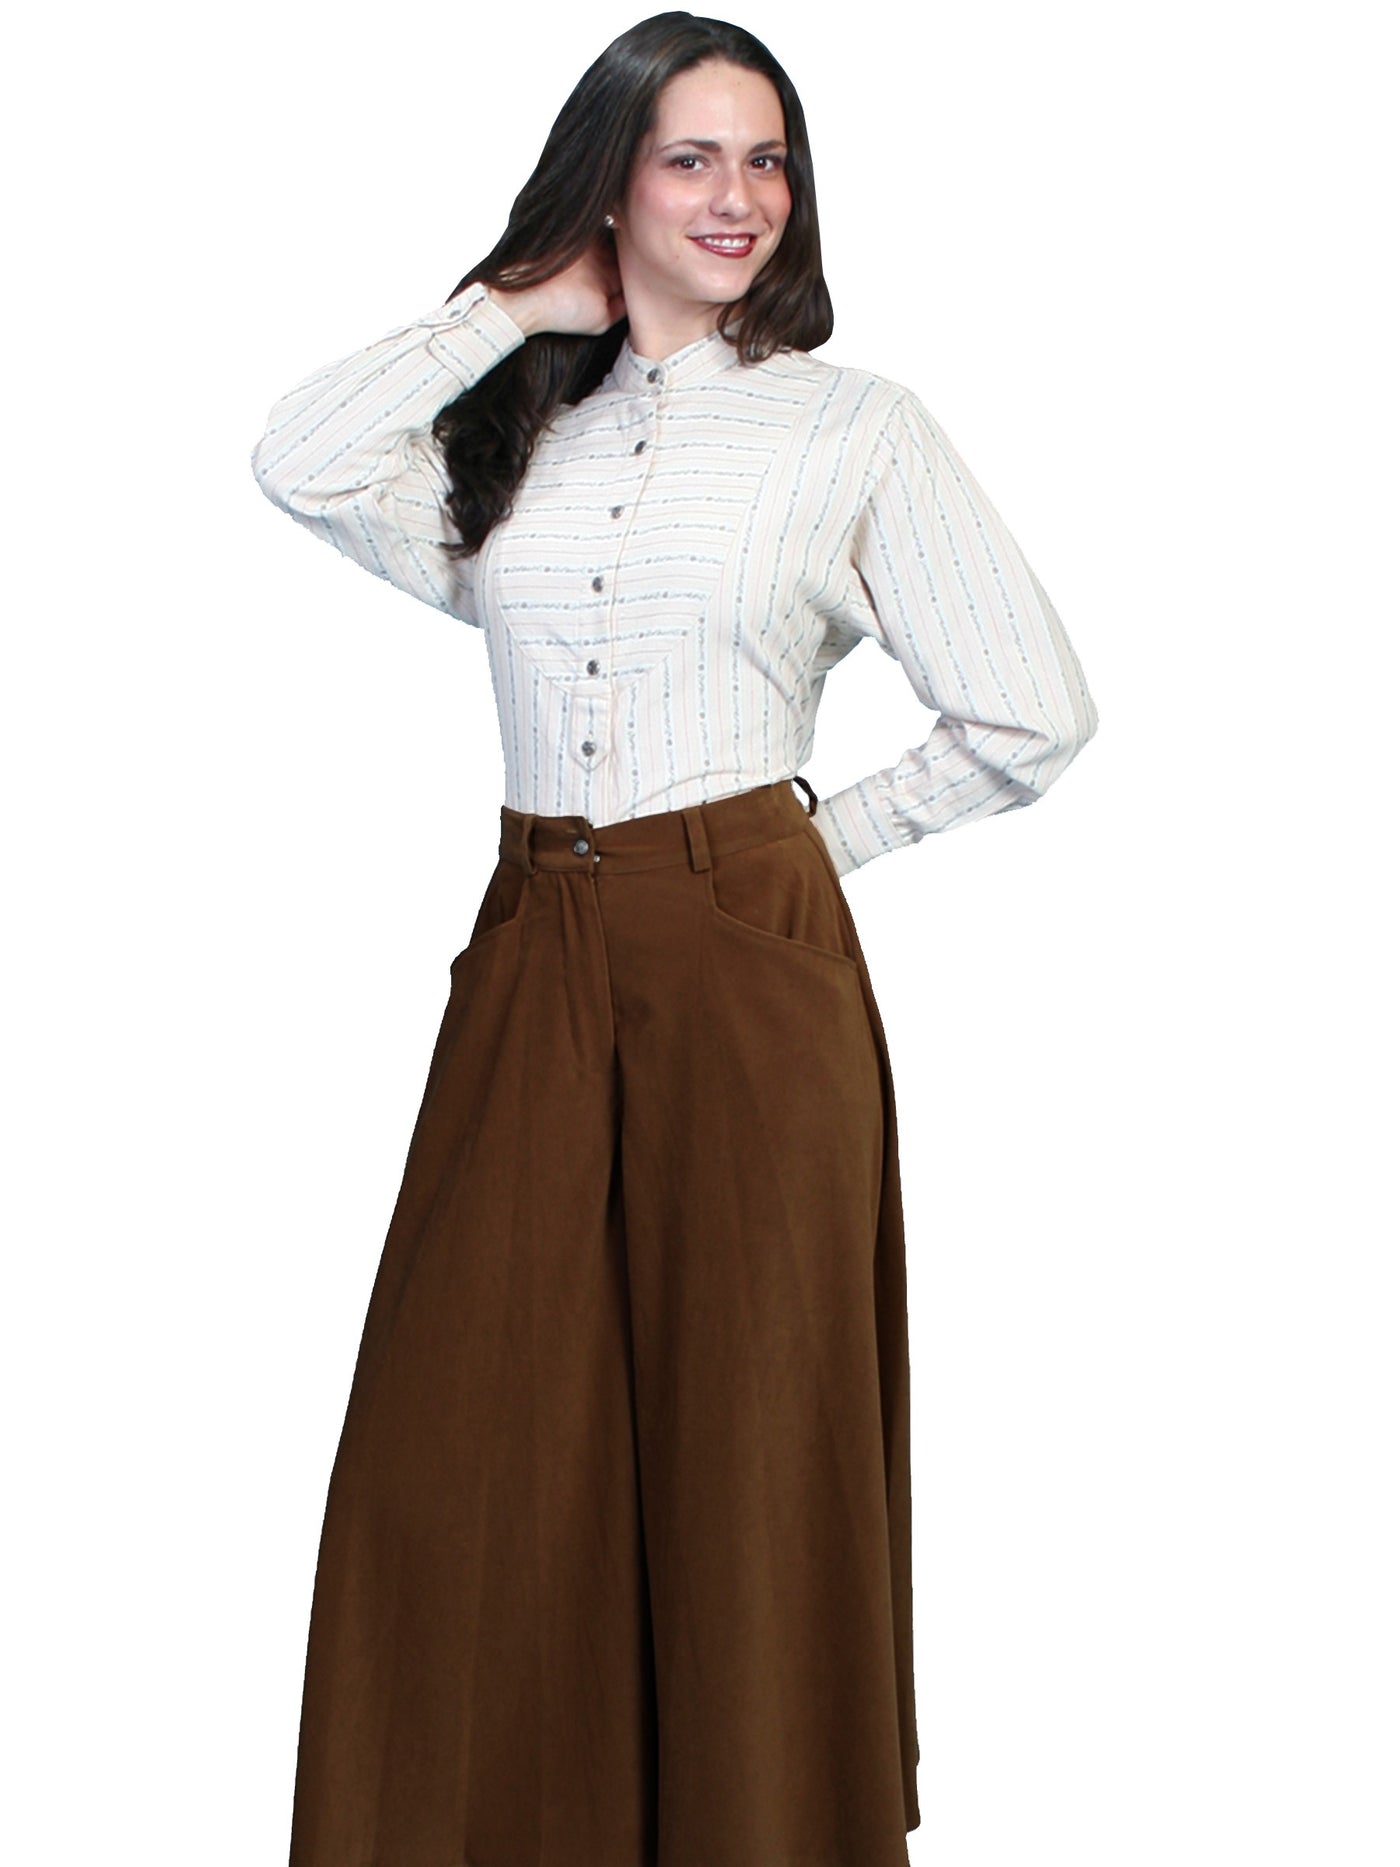 Farmhouse Split Skirt in Brown - SOLD OUT